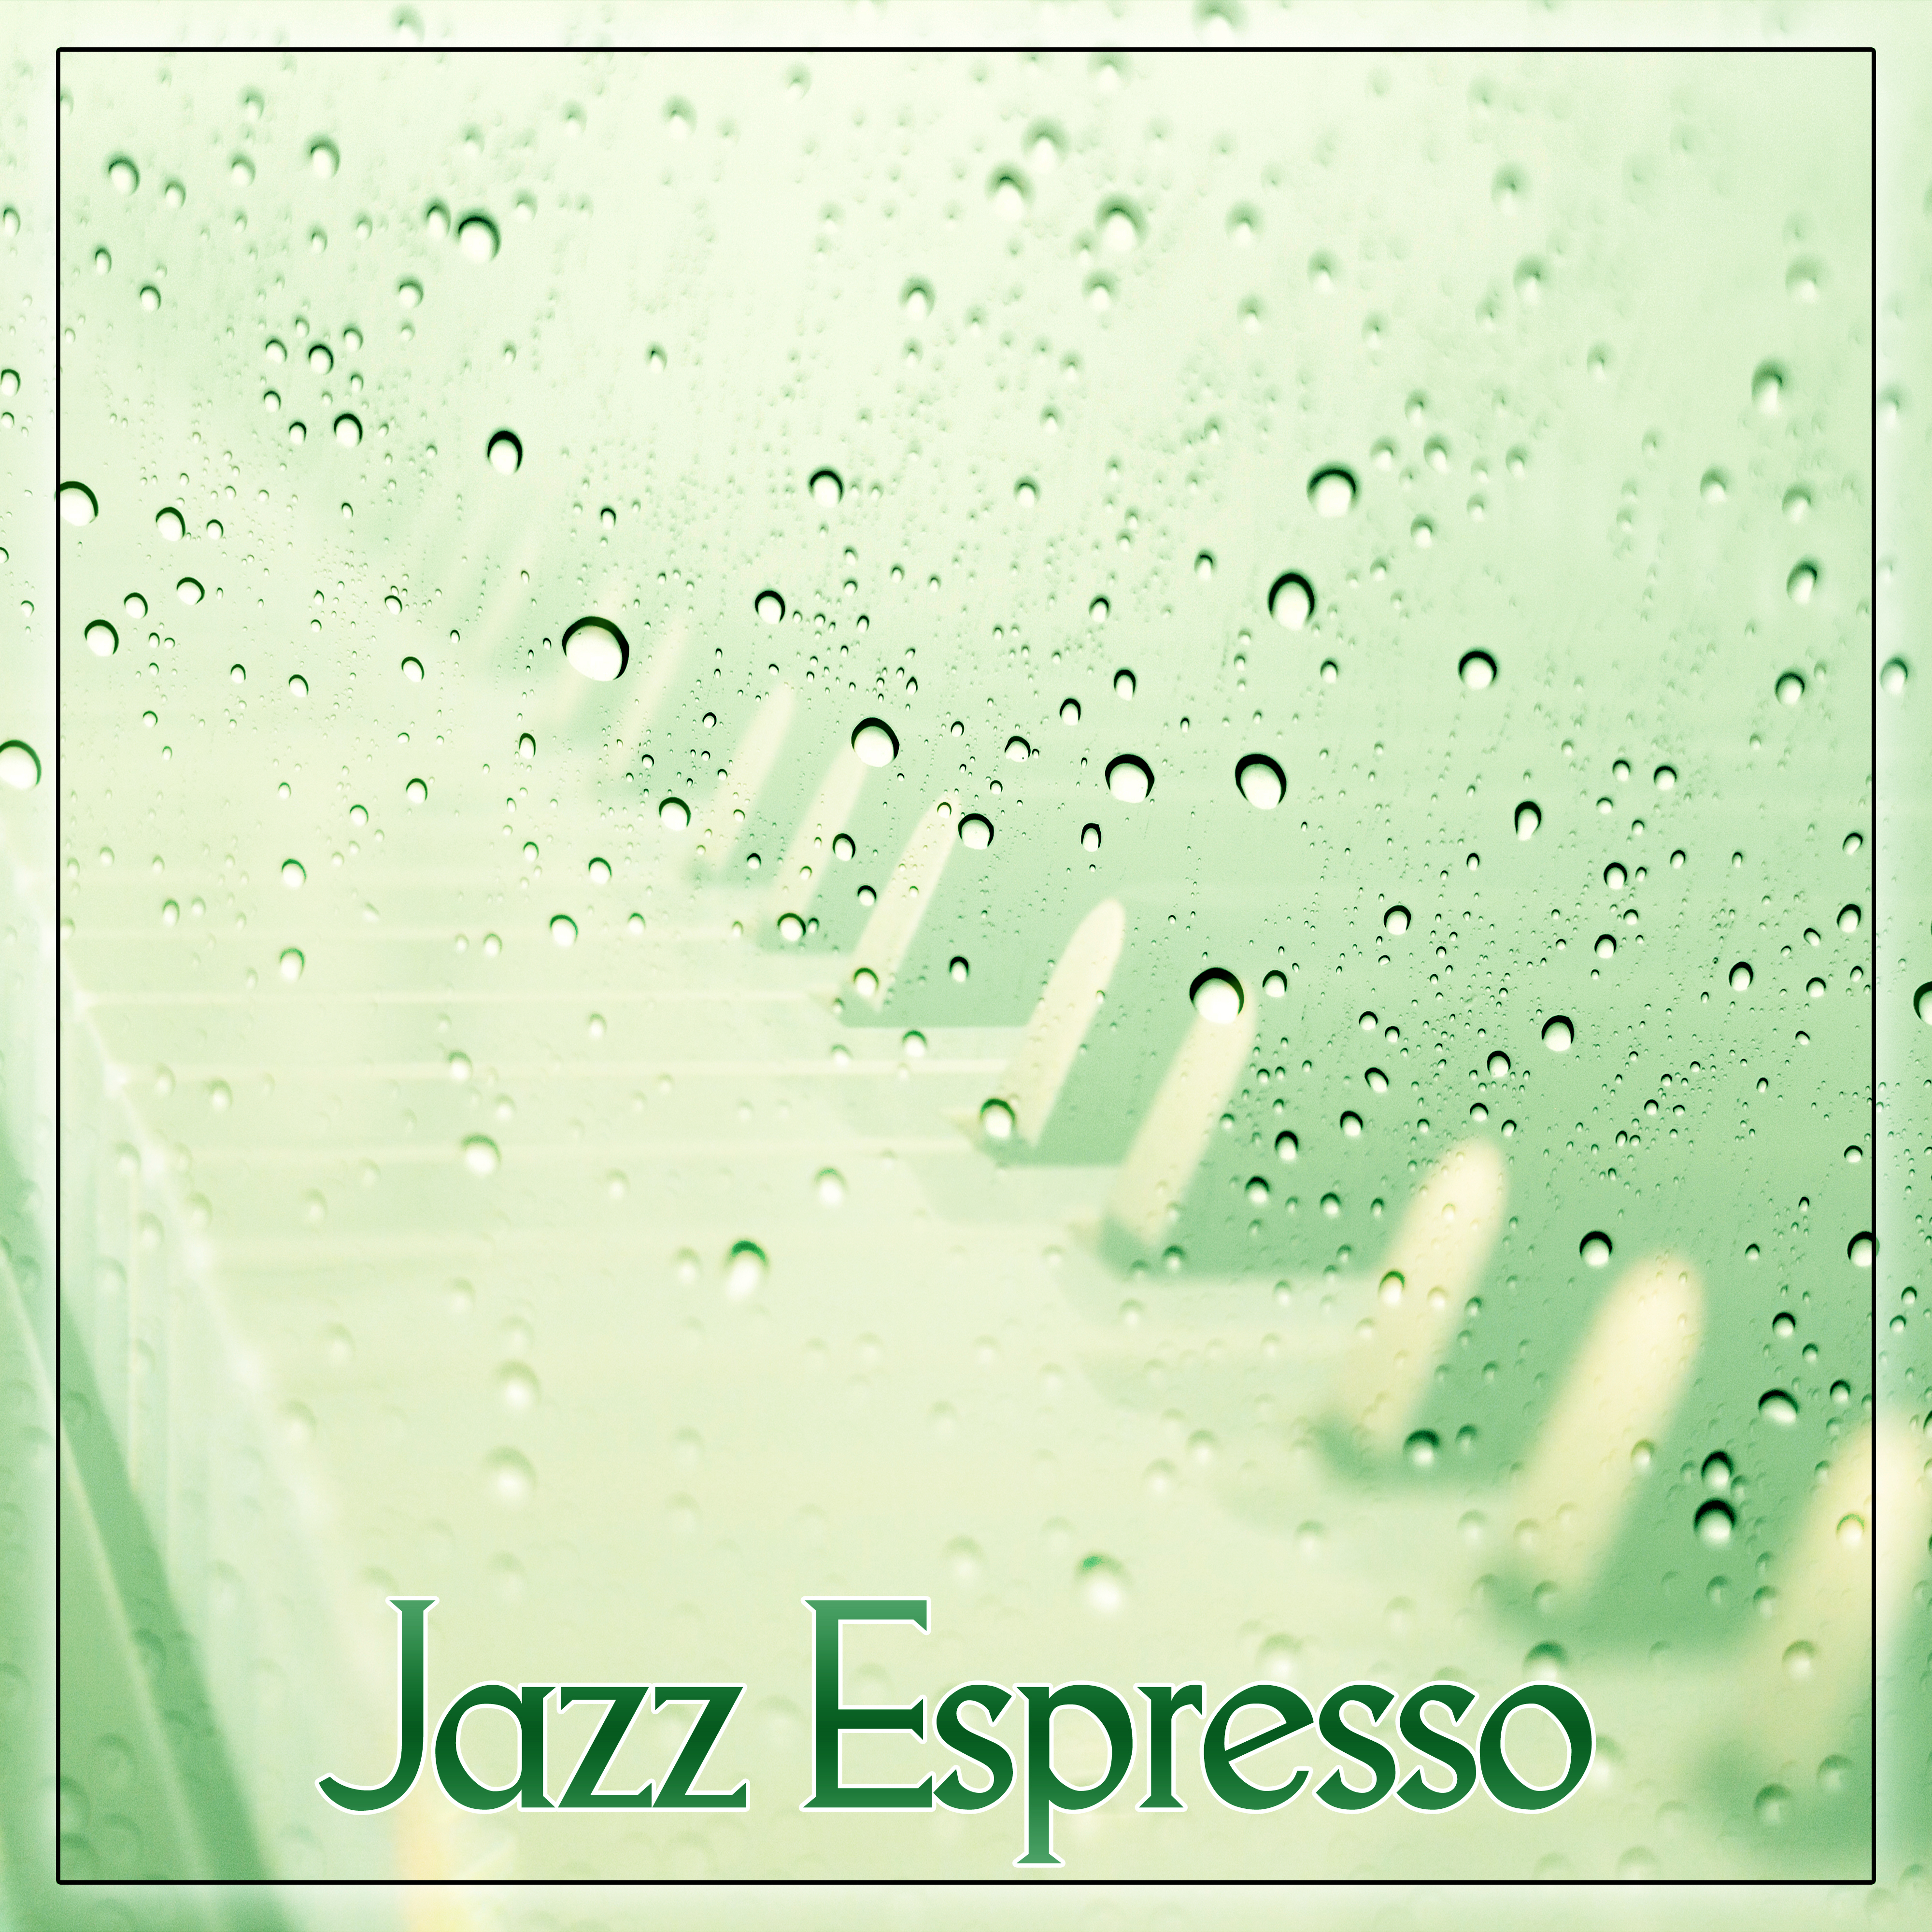 Jazz Espresso  Modern Music Full of Jazz Vibes for Relaxation, Morning Coffee, Finest Lounge Music, Best of Smooth Jazz